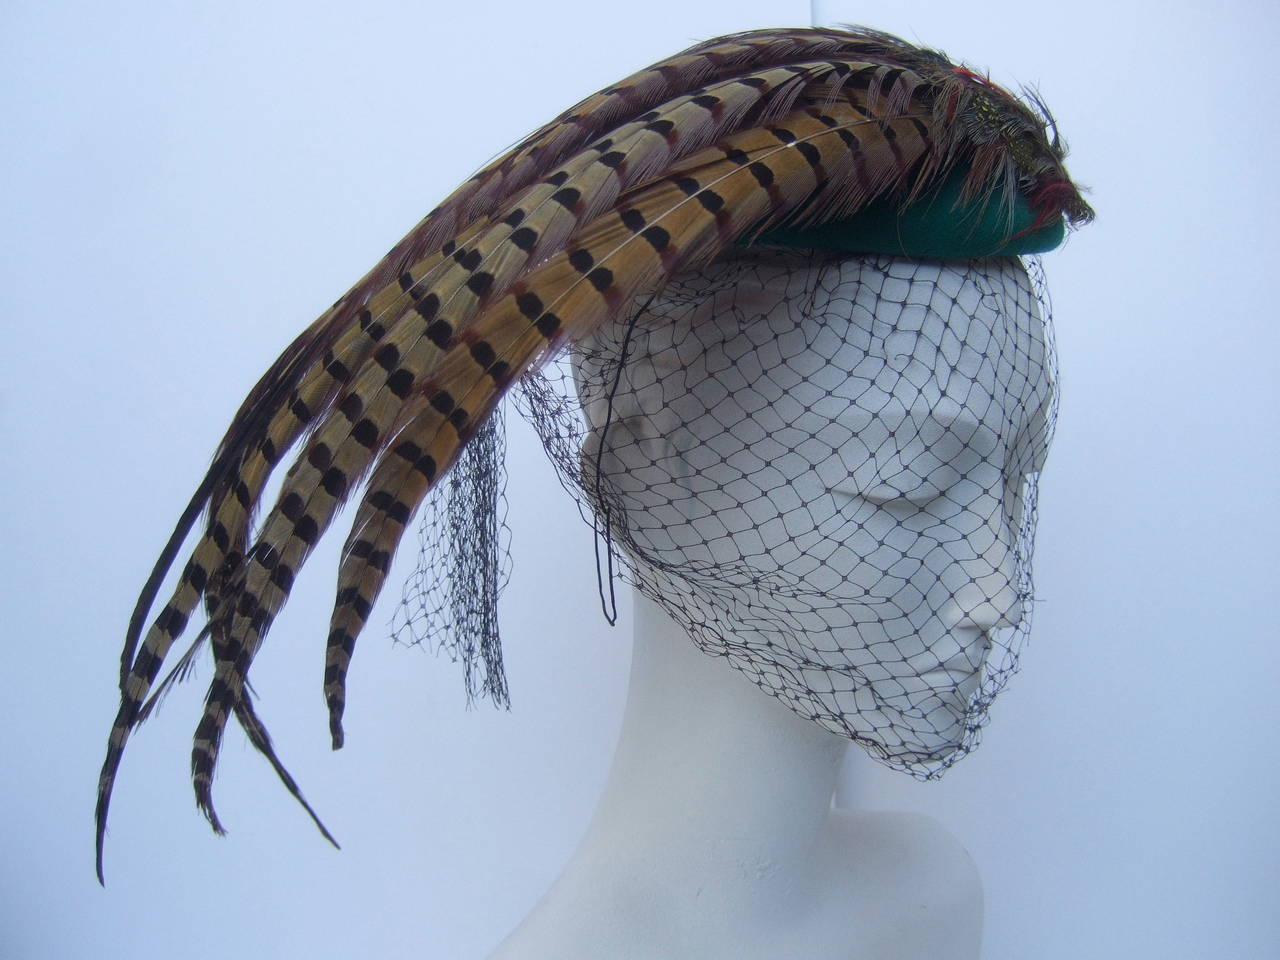 Dramatic green felt feather veiled hat c 1980s
The retro inspired stylish hat is embellished with long exotic feathers
The high fashion hat is designed with an emerald green felt wool dome 
accented with a black net veil

Designed by Liz